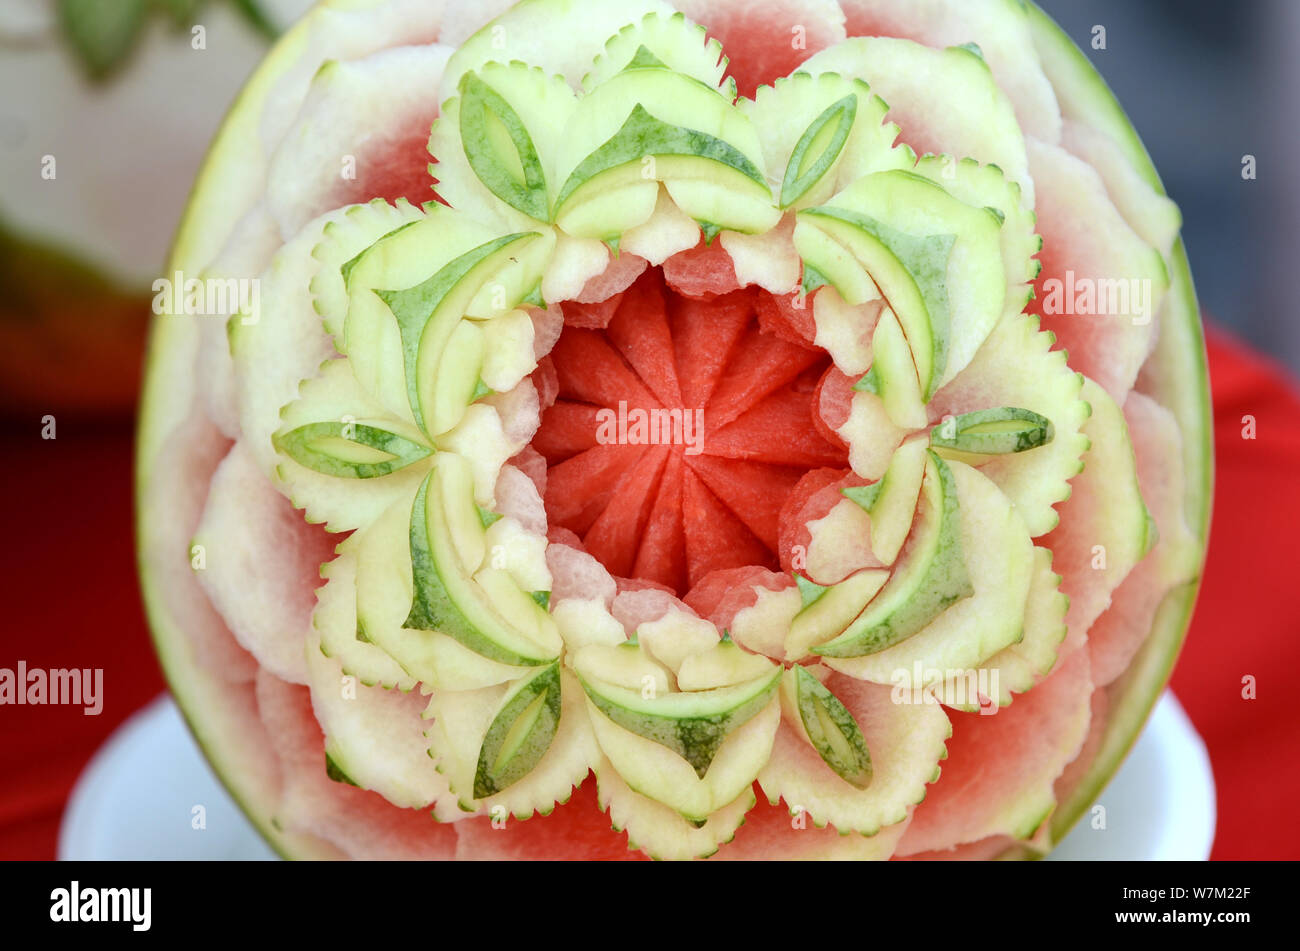 View of a watermelon carving created by Chinese post-80's man Guan Yunlong in Xuchang city, central China's Henan province, 13 August 2017.   Chinese Stock Photo